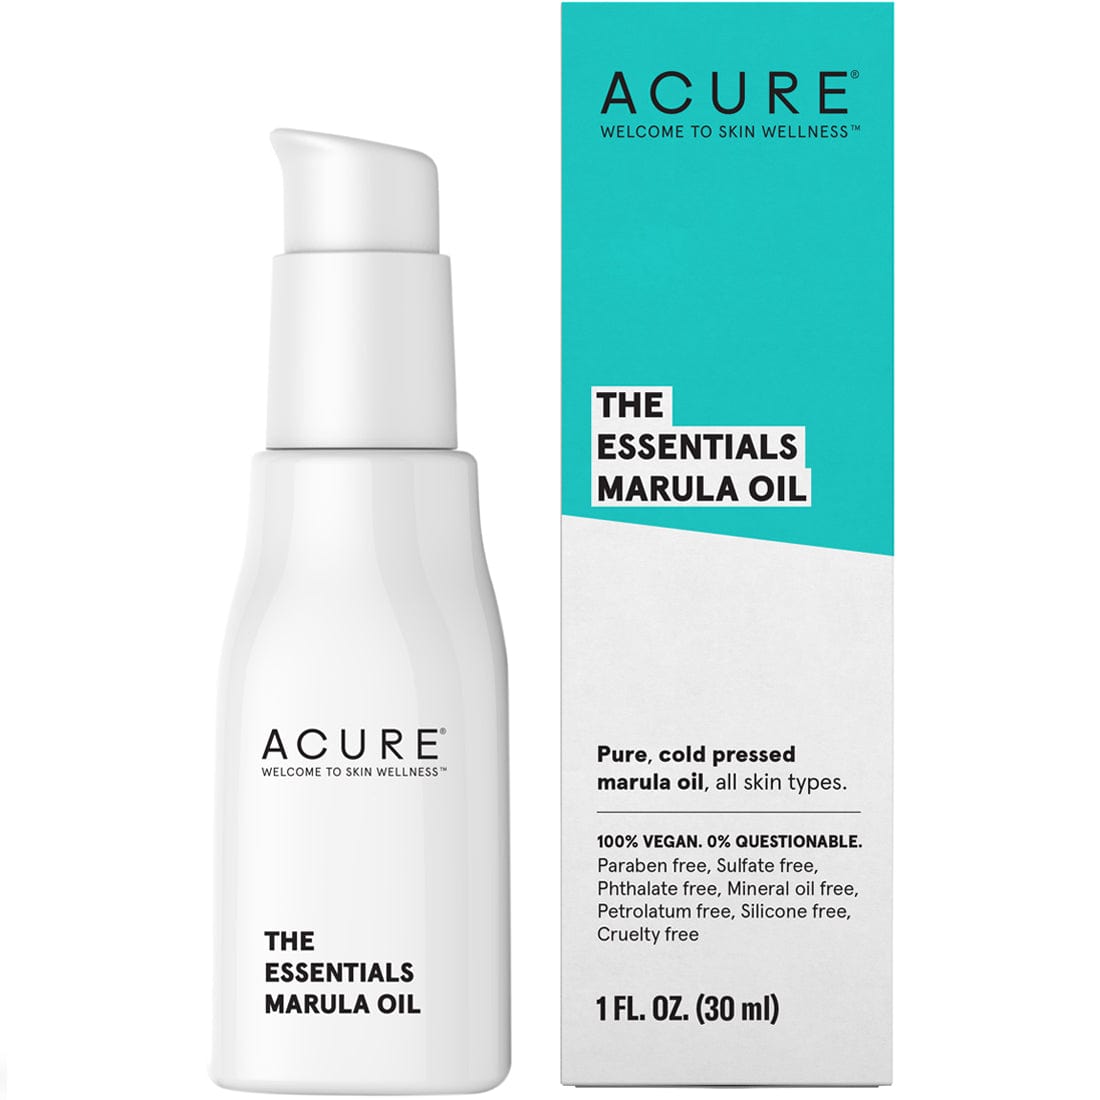 Acure The Essentials Marula Oil, 30ml